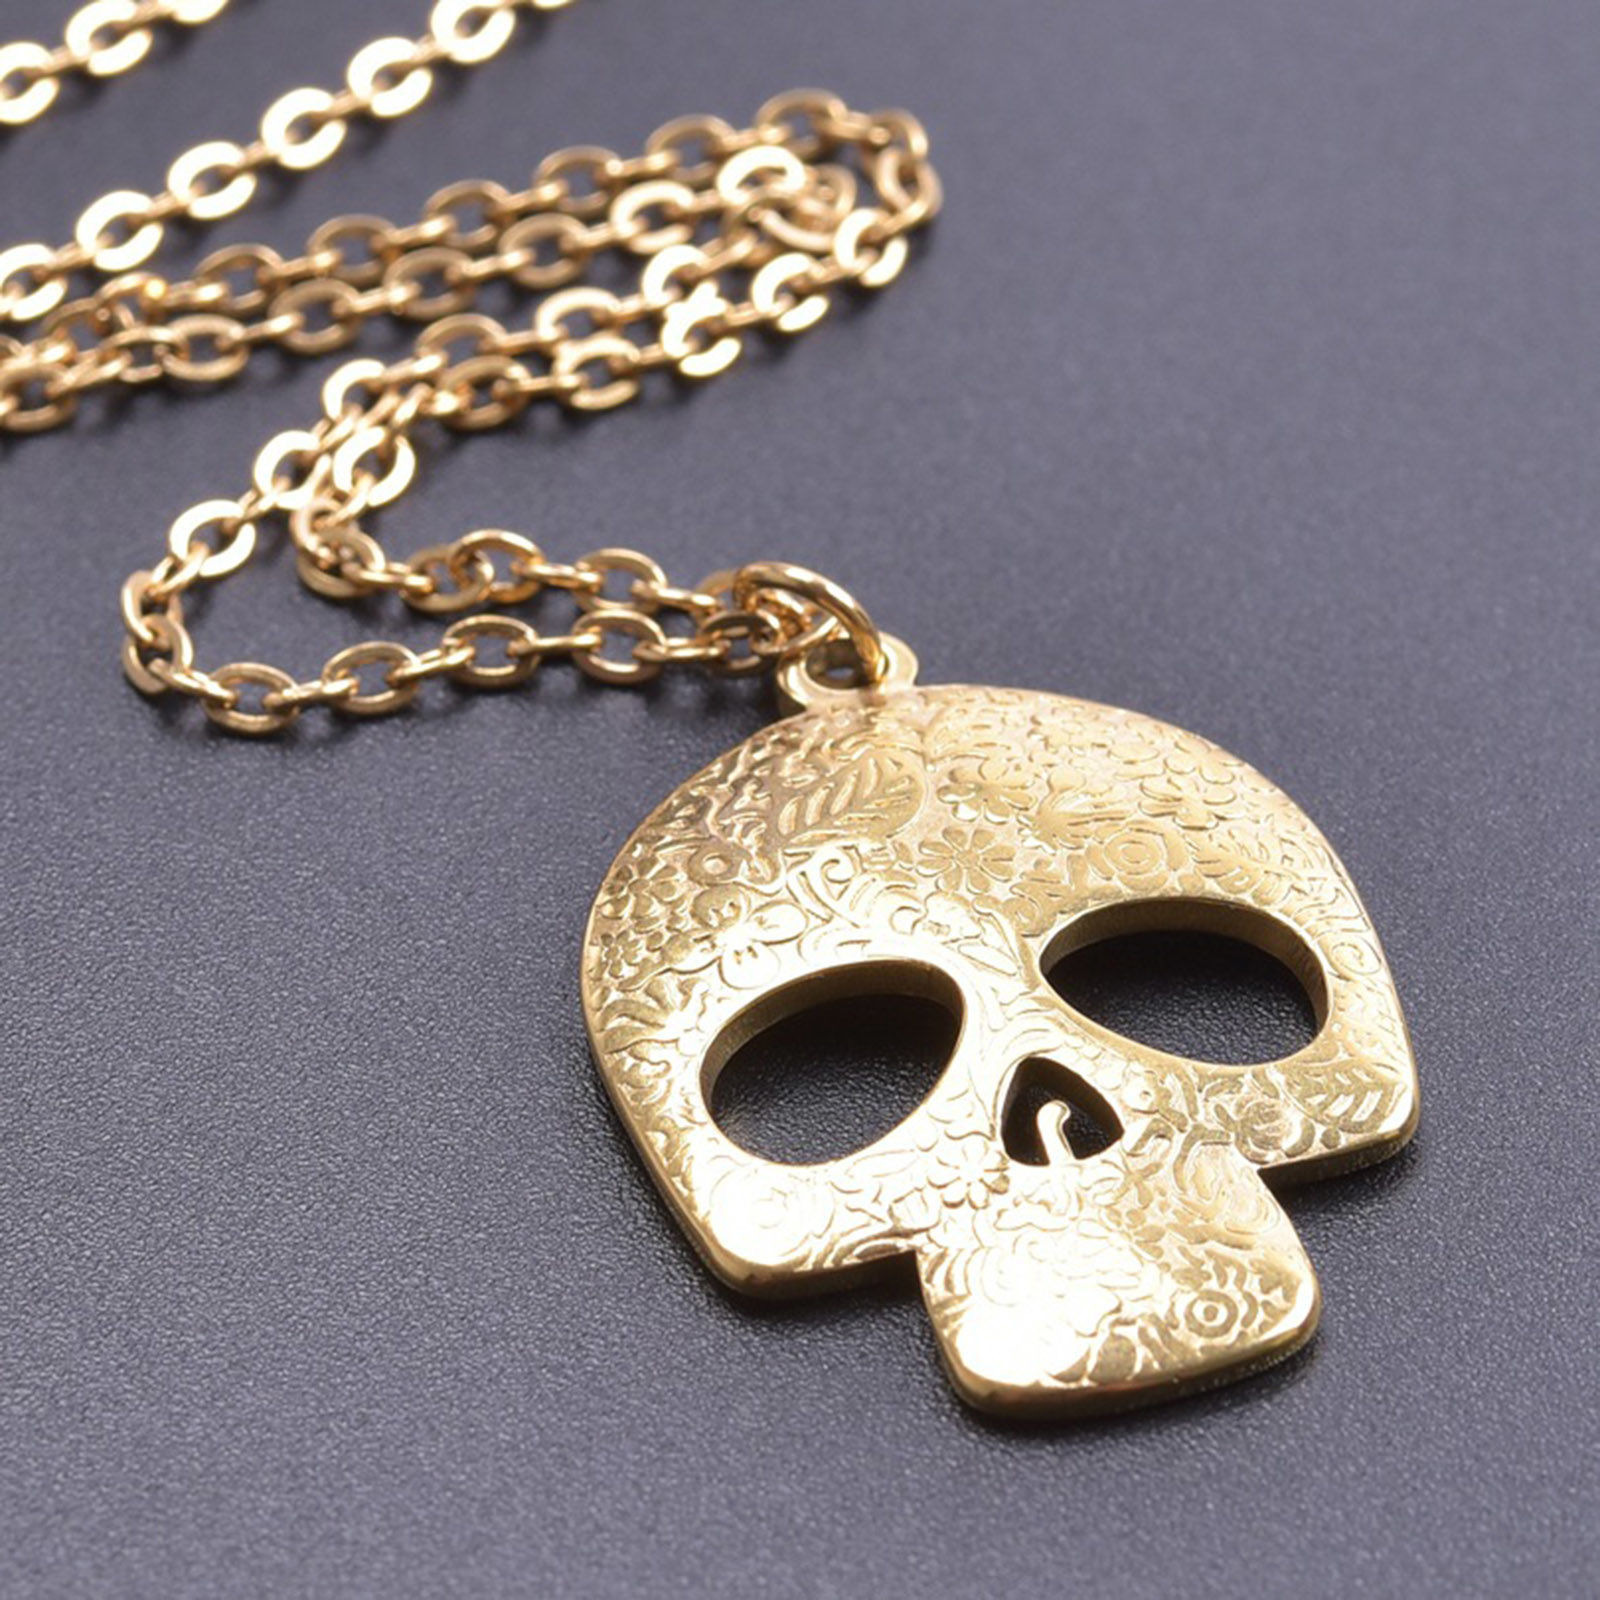 Picture of Stainless Steel Halloween Link Cable Chain Necklace Gold Plated Skull Carved Pattern Hollow 50cm(19 5/8") long, 1 Piece